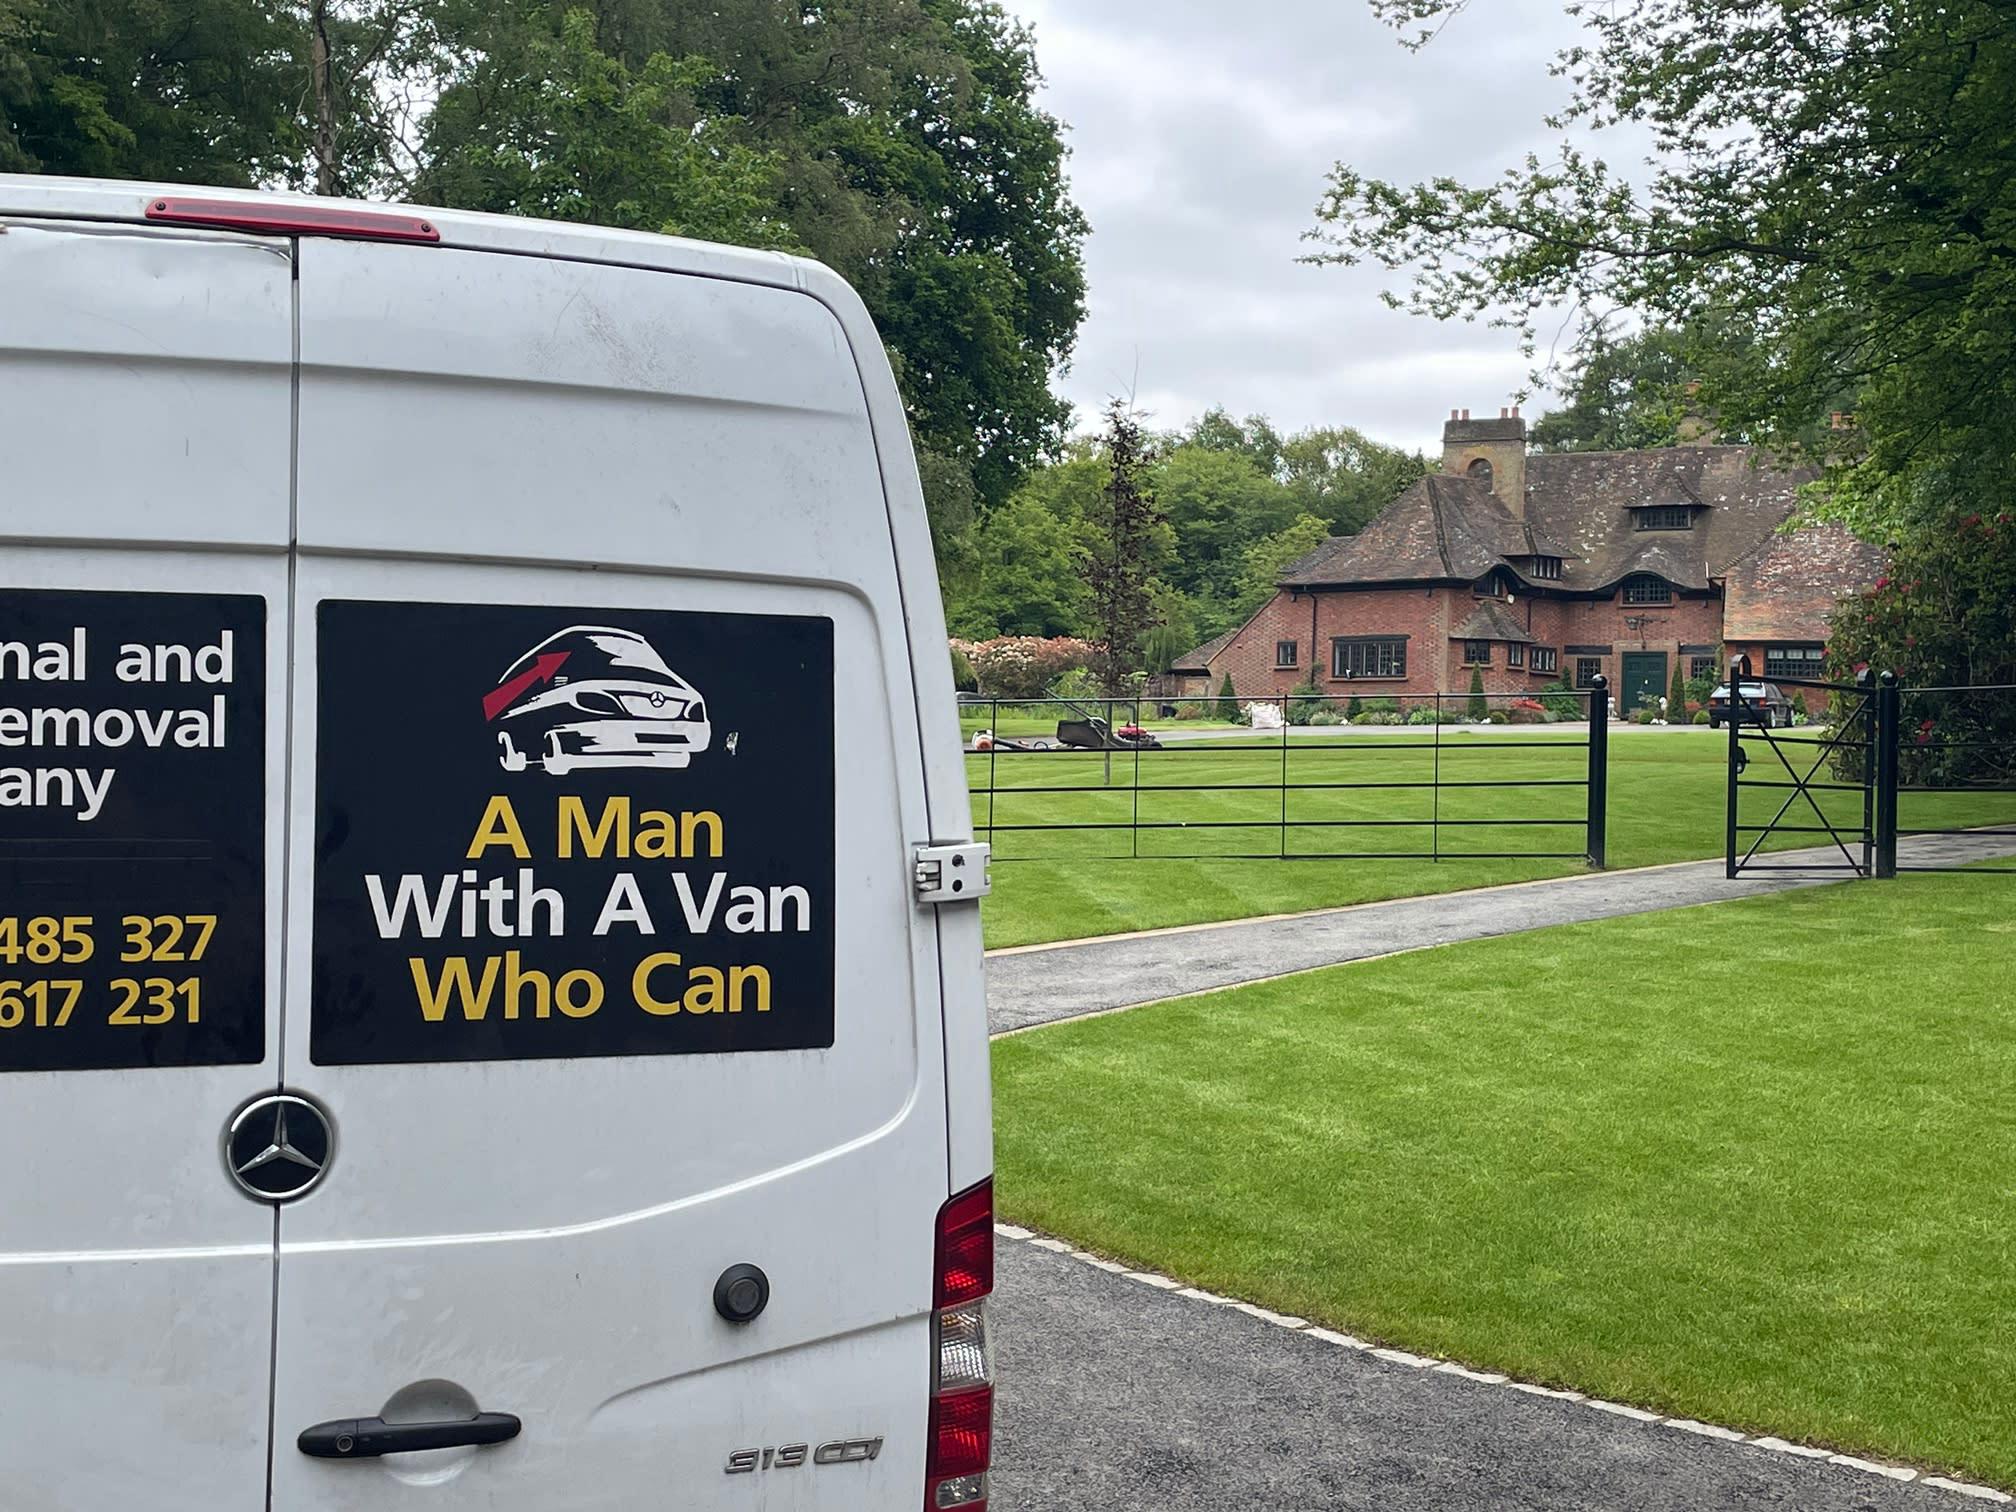 Images A Man with a Van Who Can